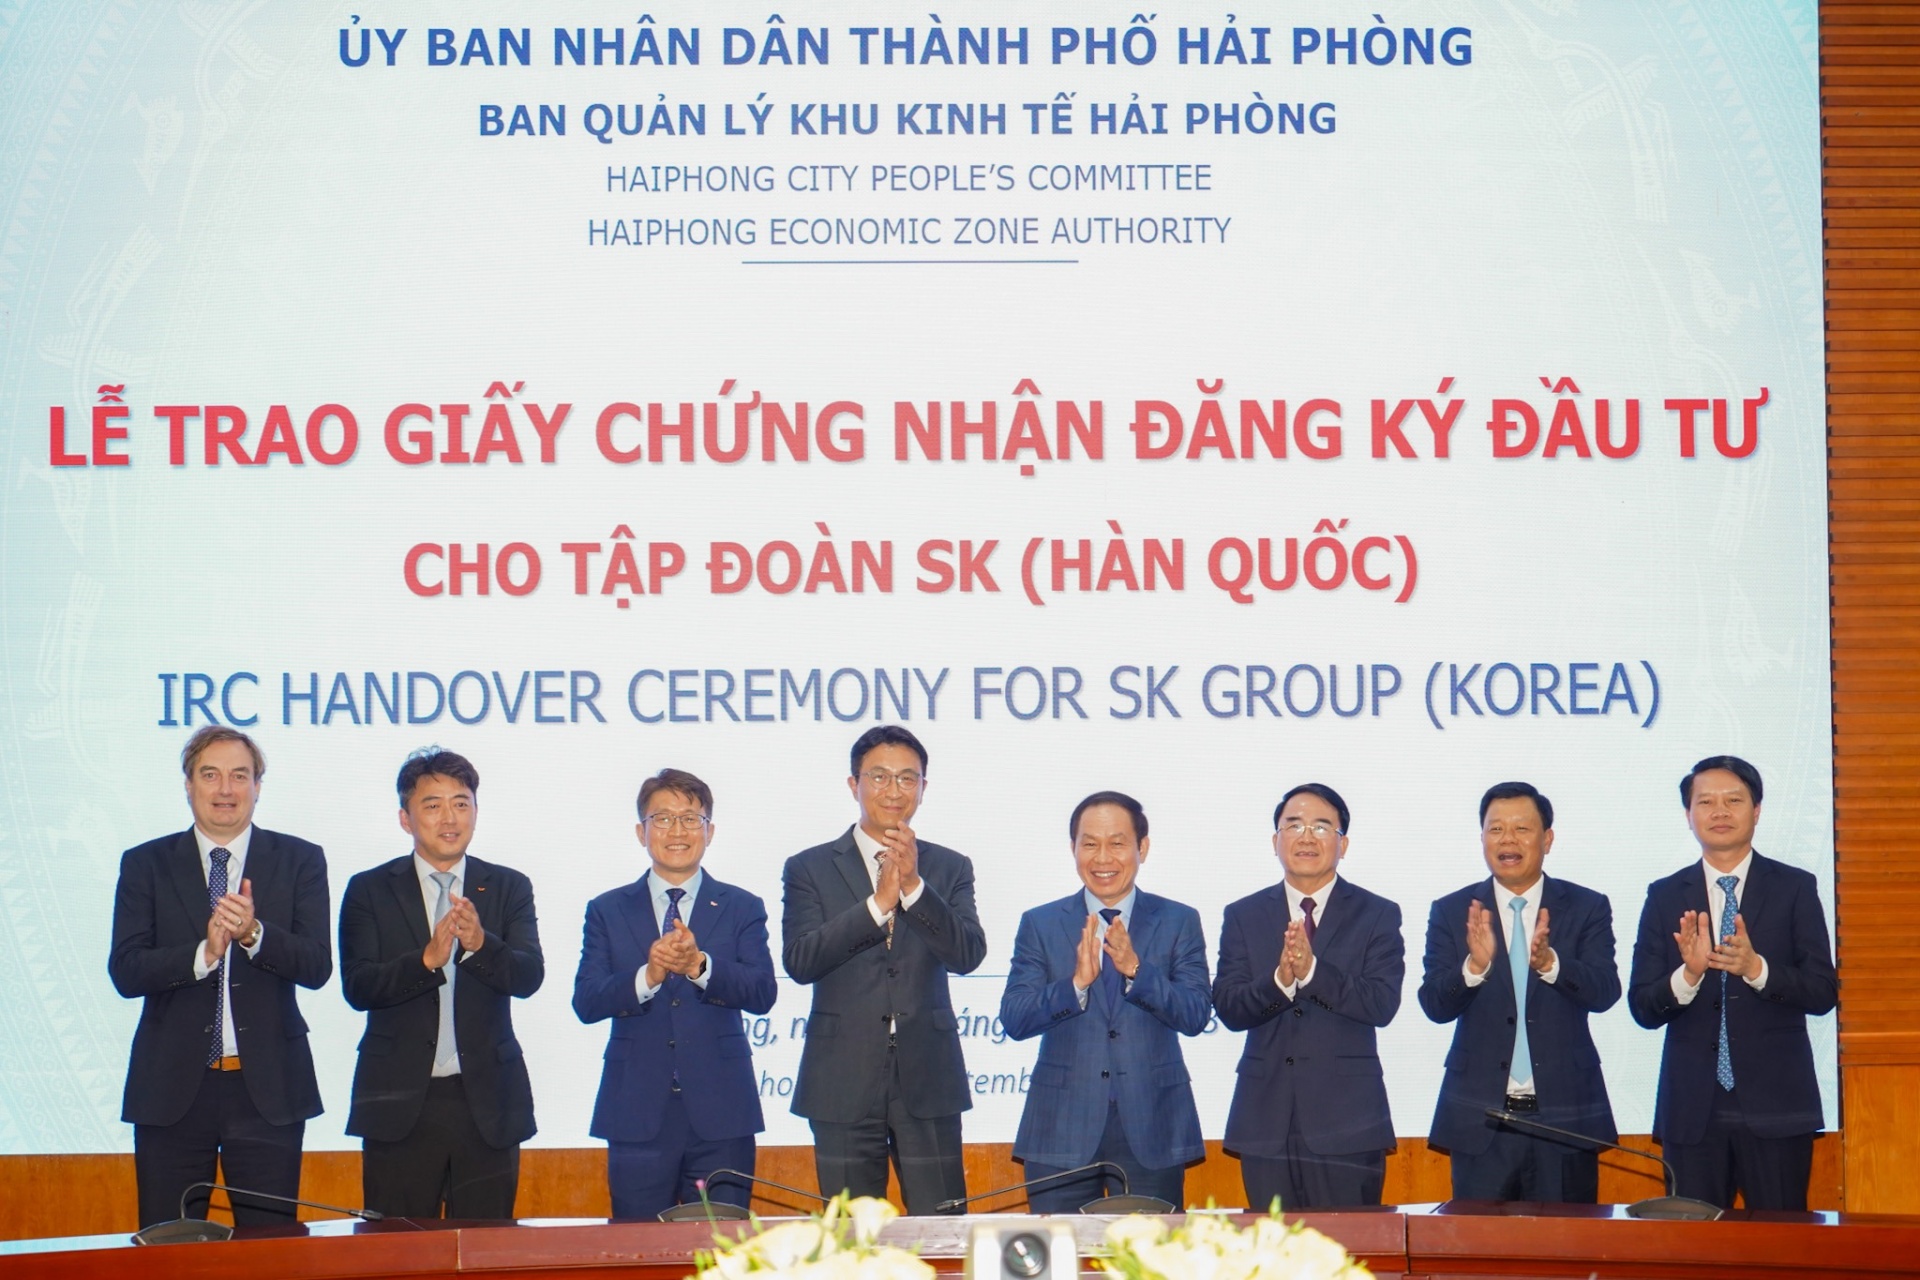 SK Group to pour $500 million into DEEP C Industrial Zones in Haiphong